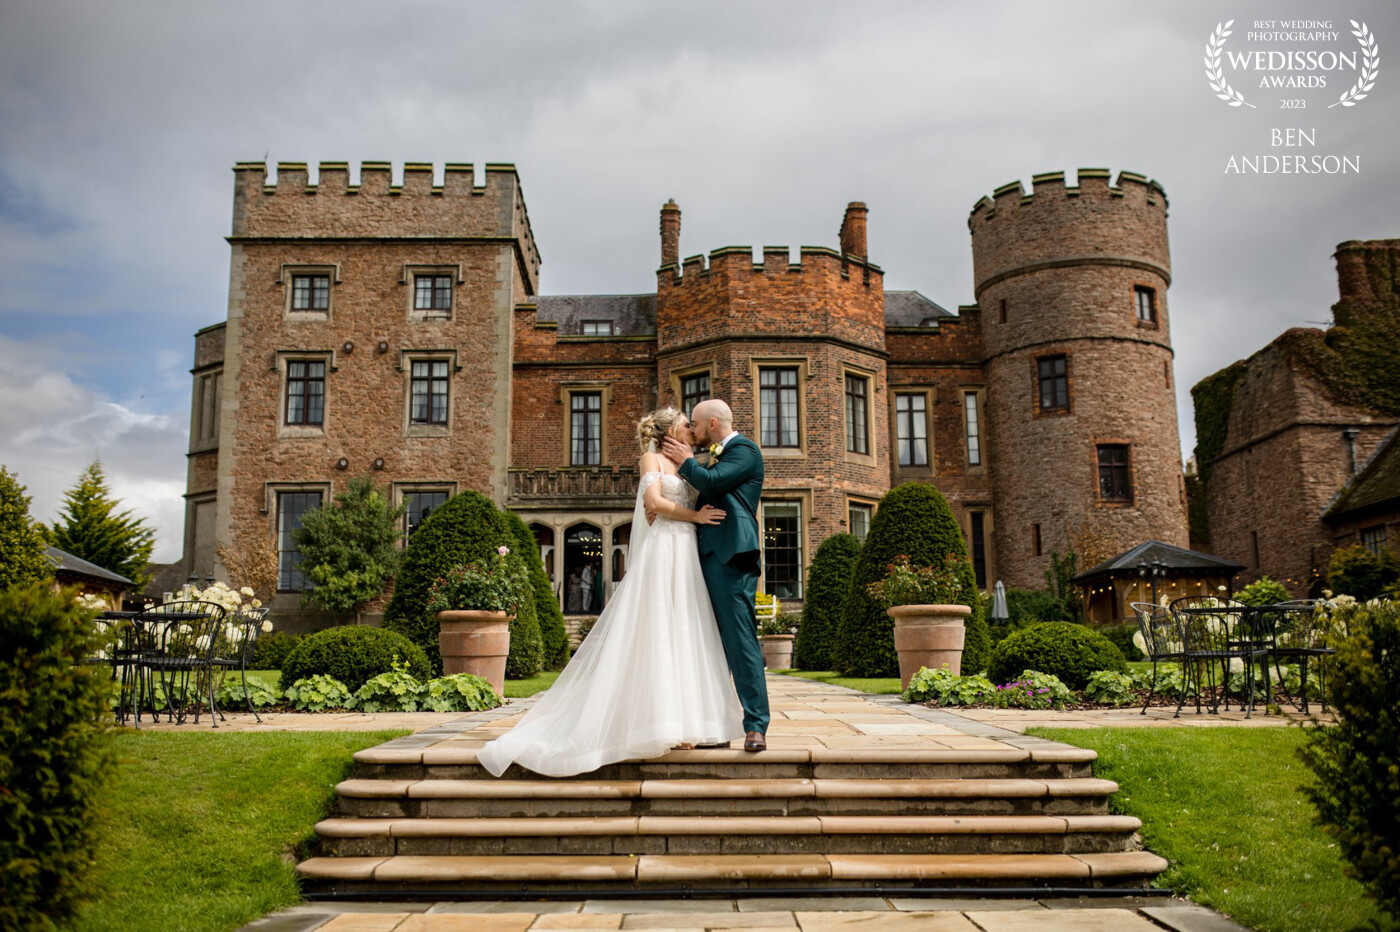 I just wanted to capture the beauty of Rowton Castle with the couple.  All I shouted was, "Tom! Give you wife a kiss." and boom I came up with this gorgeous image.